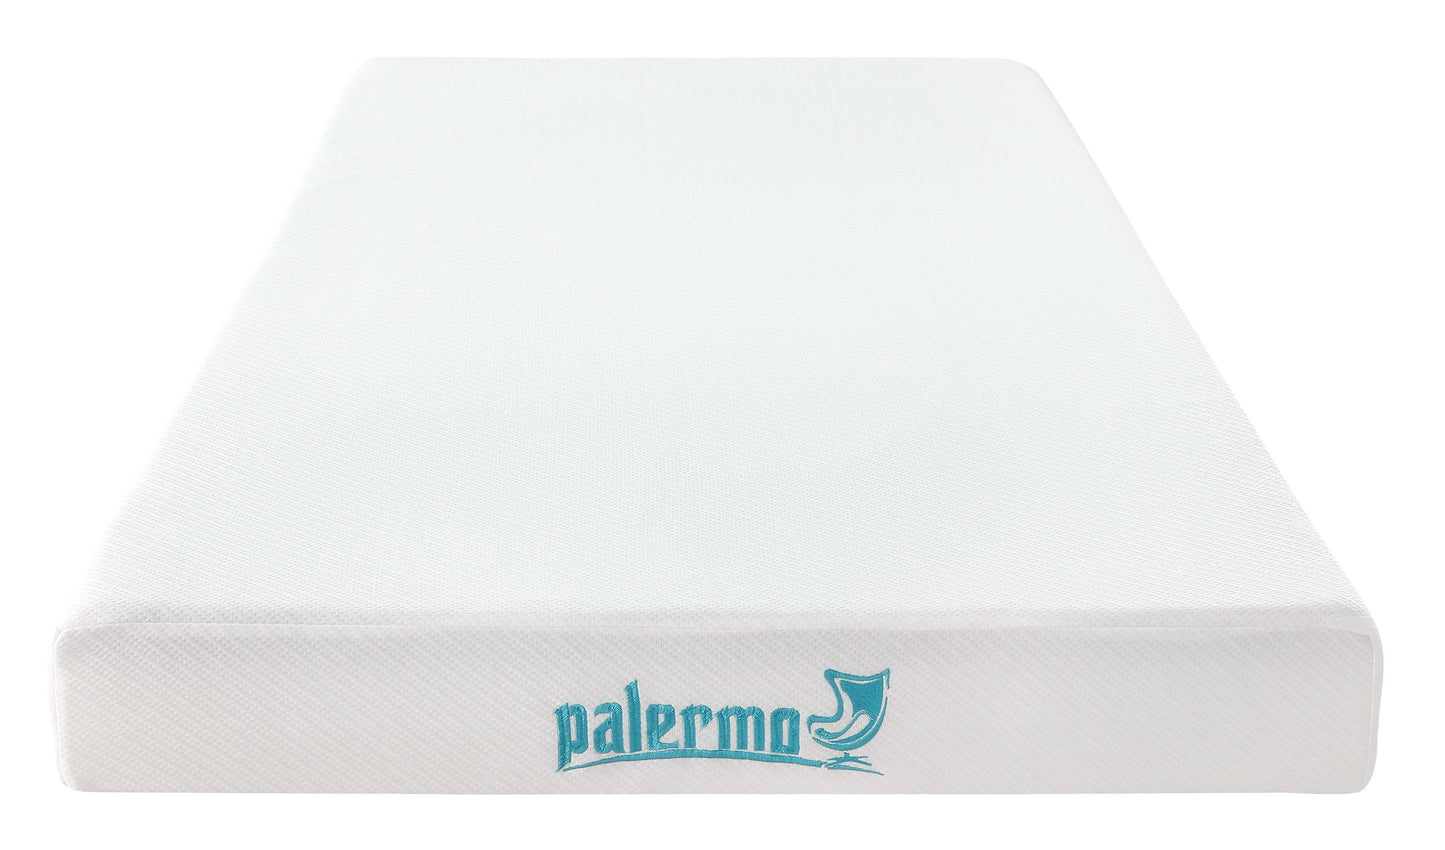 Palermo King Single Mattress Memory Foam Green Tea Infused CertiPUR Approved - image2